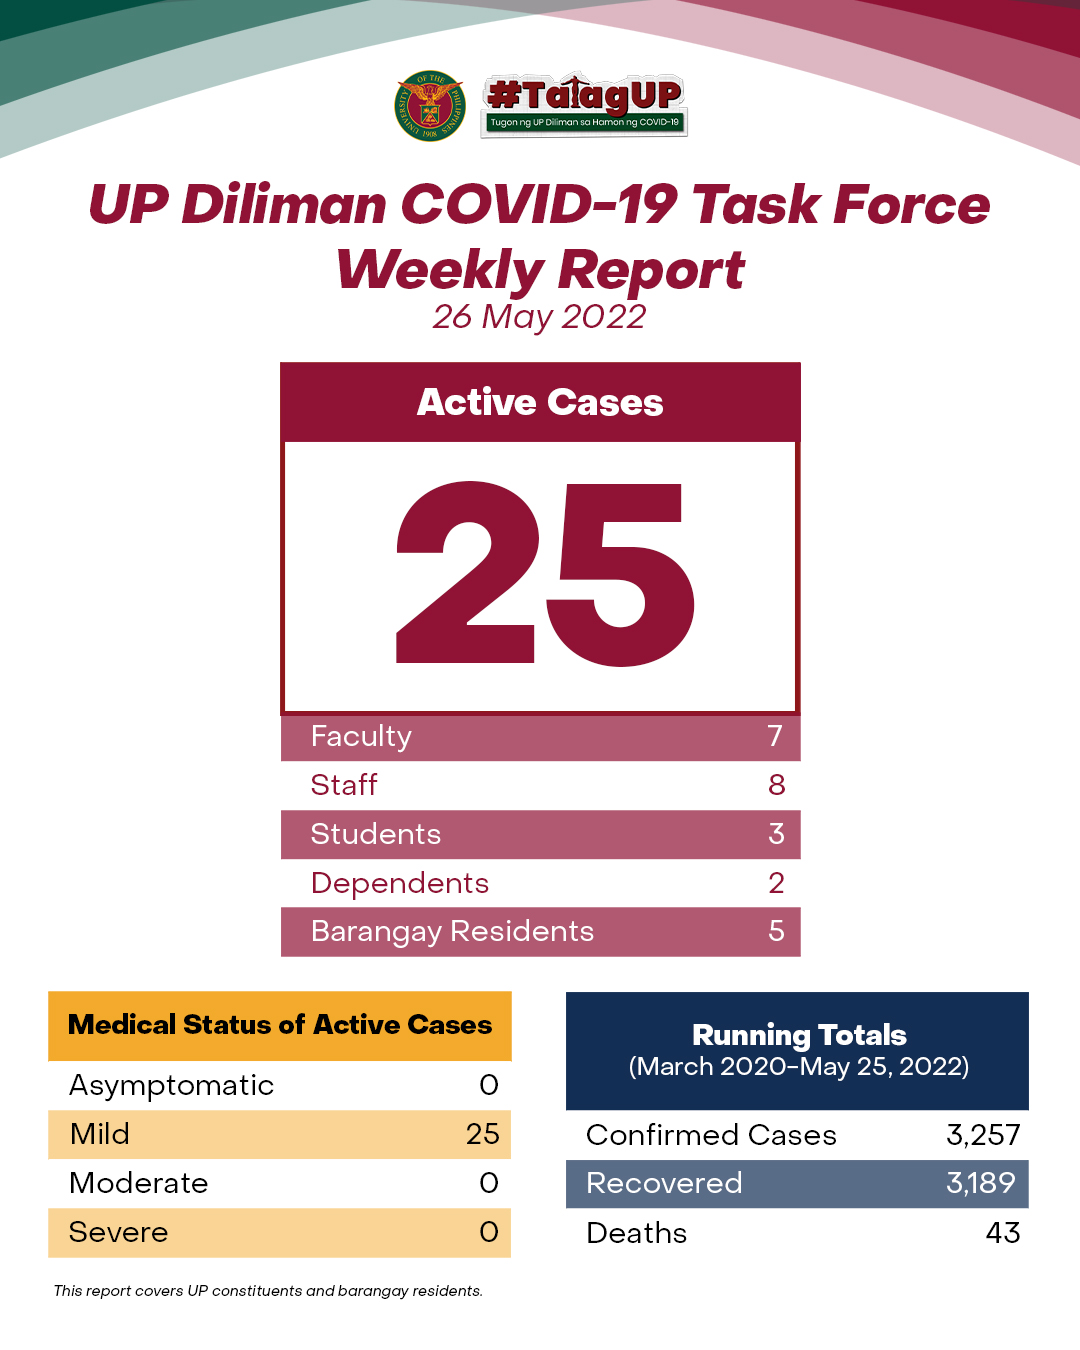 UP Diliman COVID-19 Task Force Weekly Report (26 May 2022)